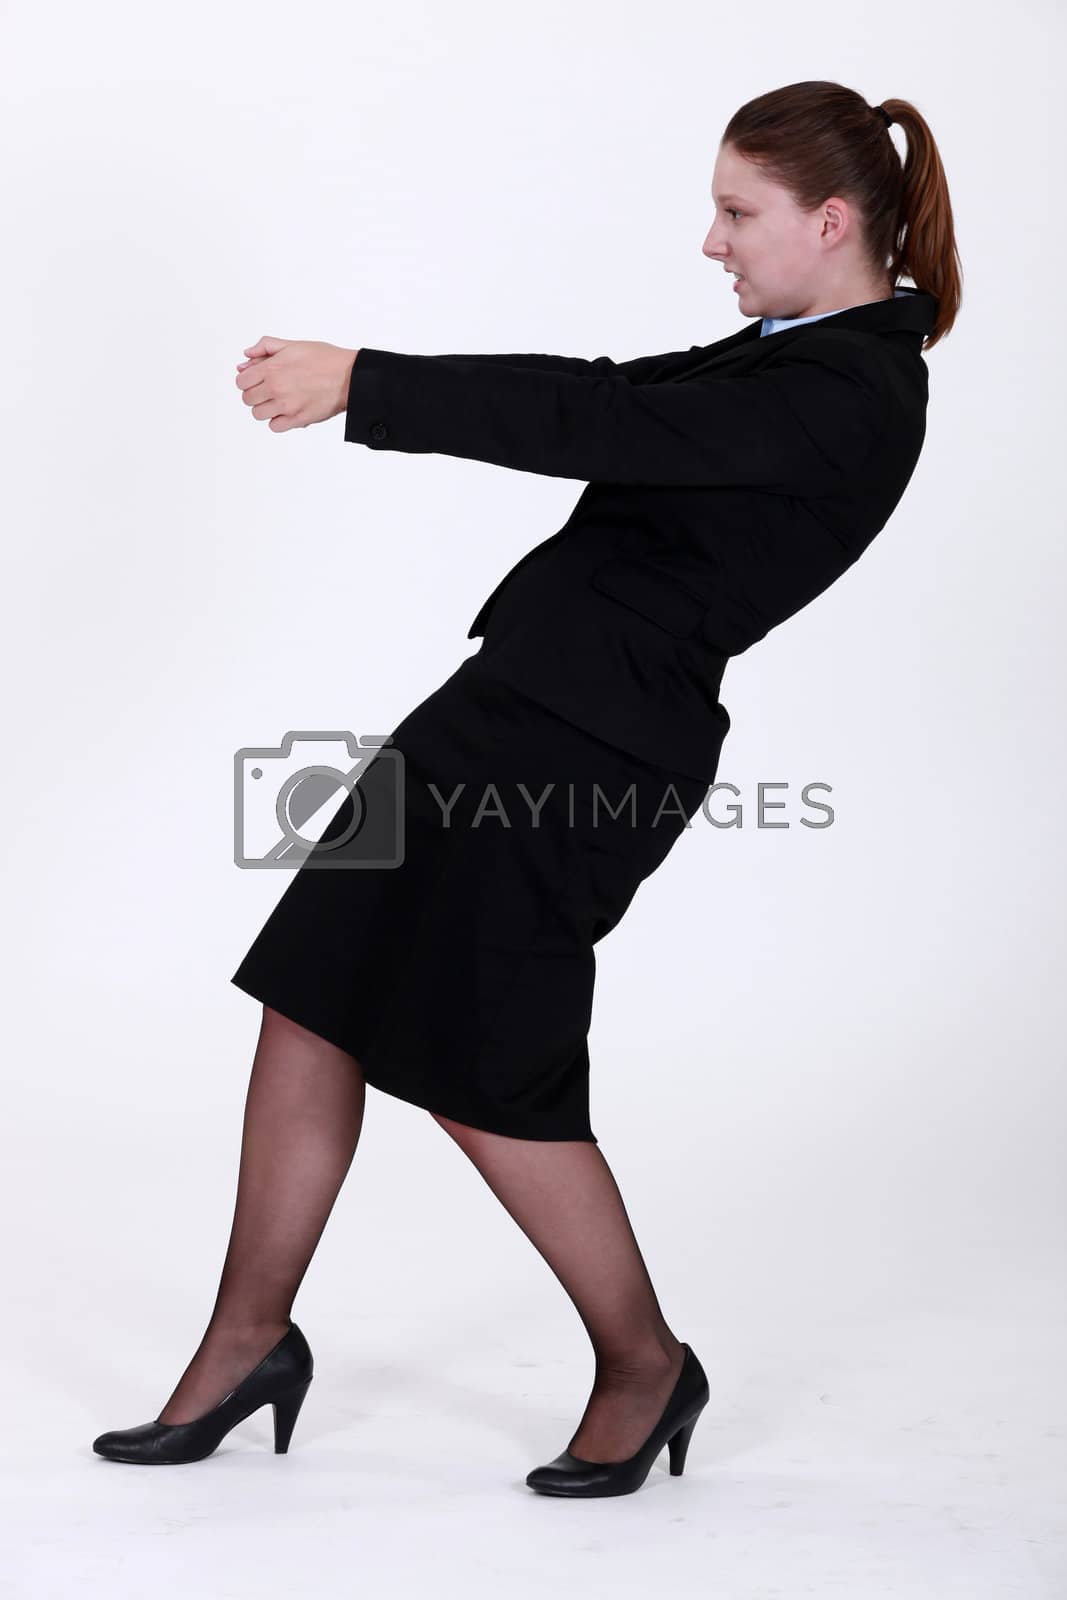 Royalty free image of Businesswoman pulling an invisible object by phovoir